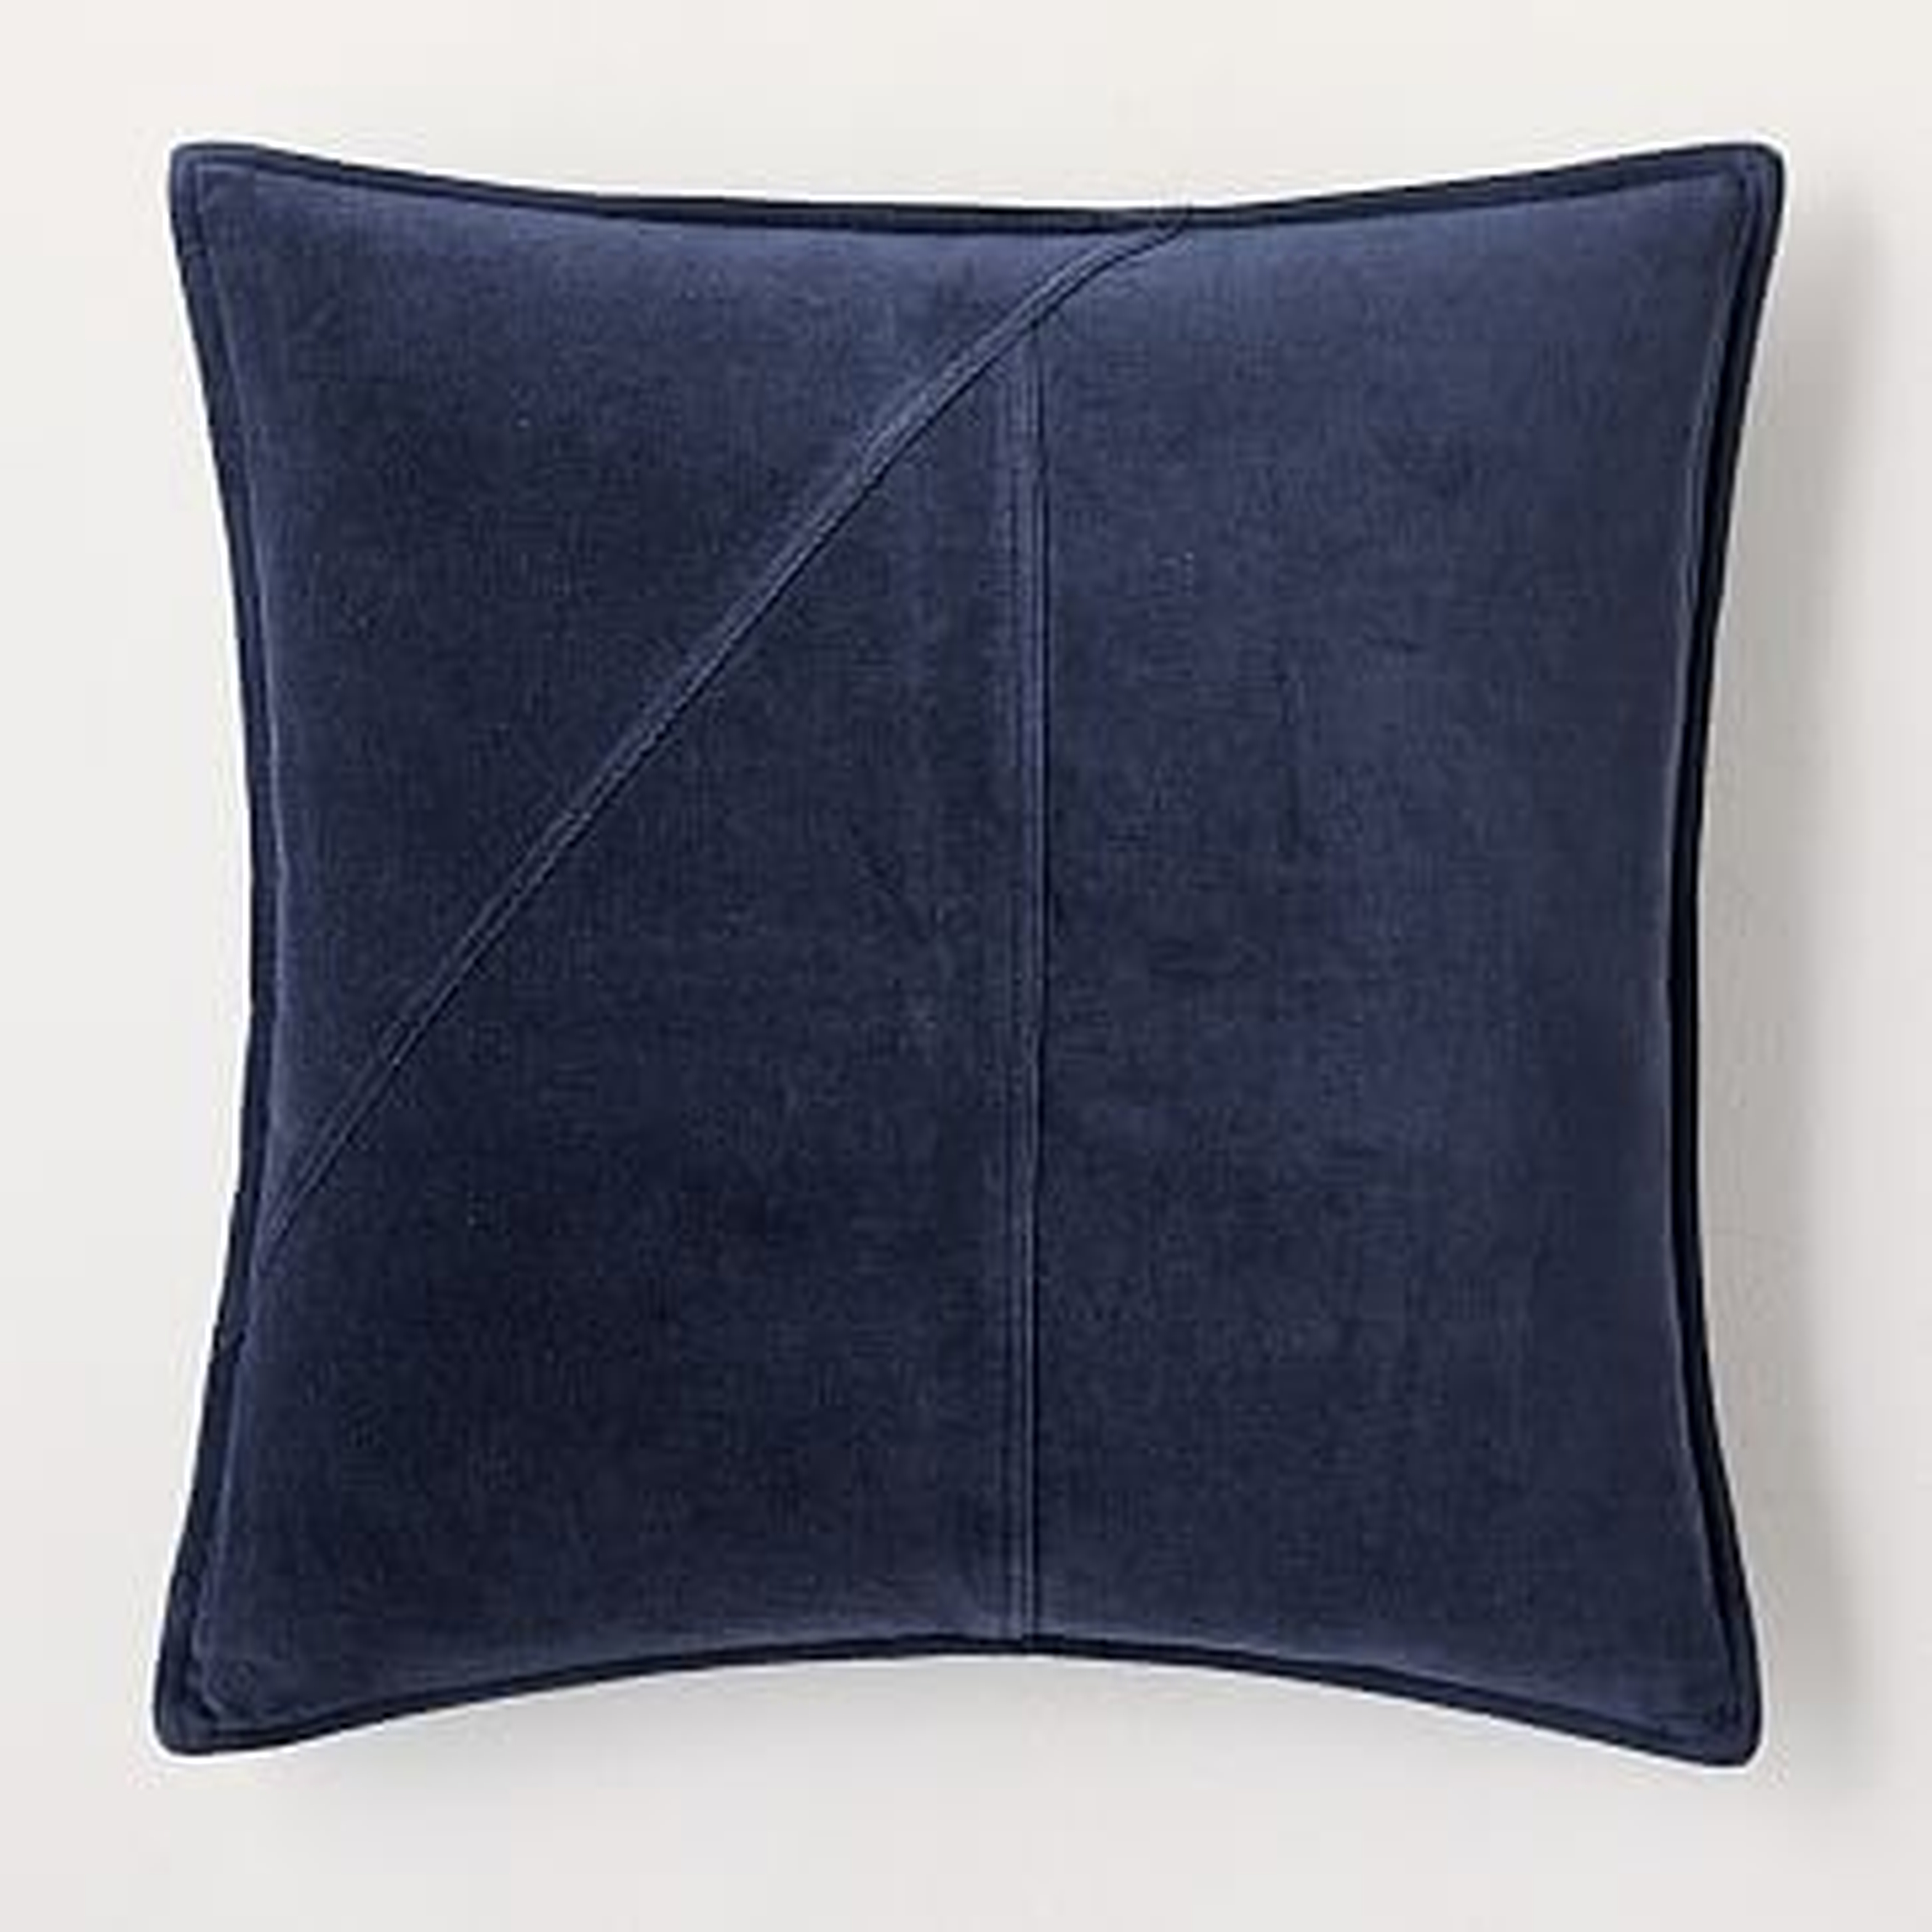 Washed Cotton Velvet Pillow Cover, 18"x18", Midnight - West Elm